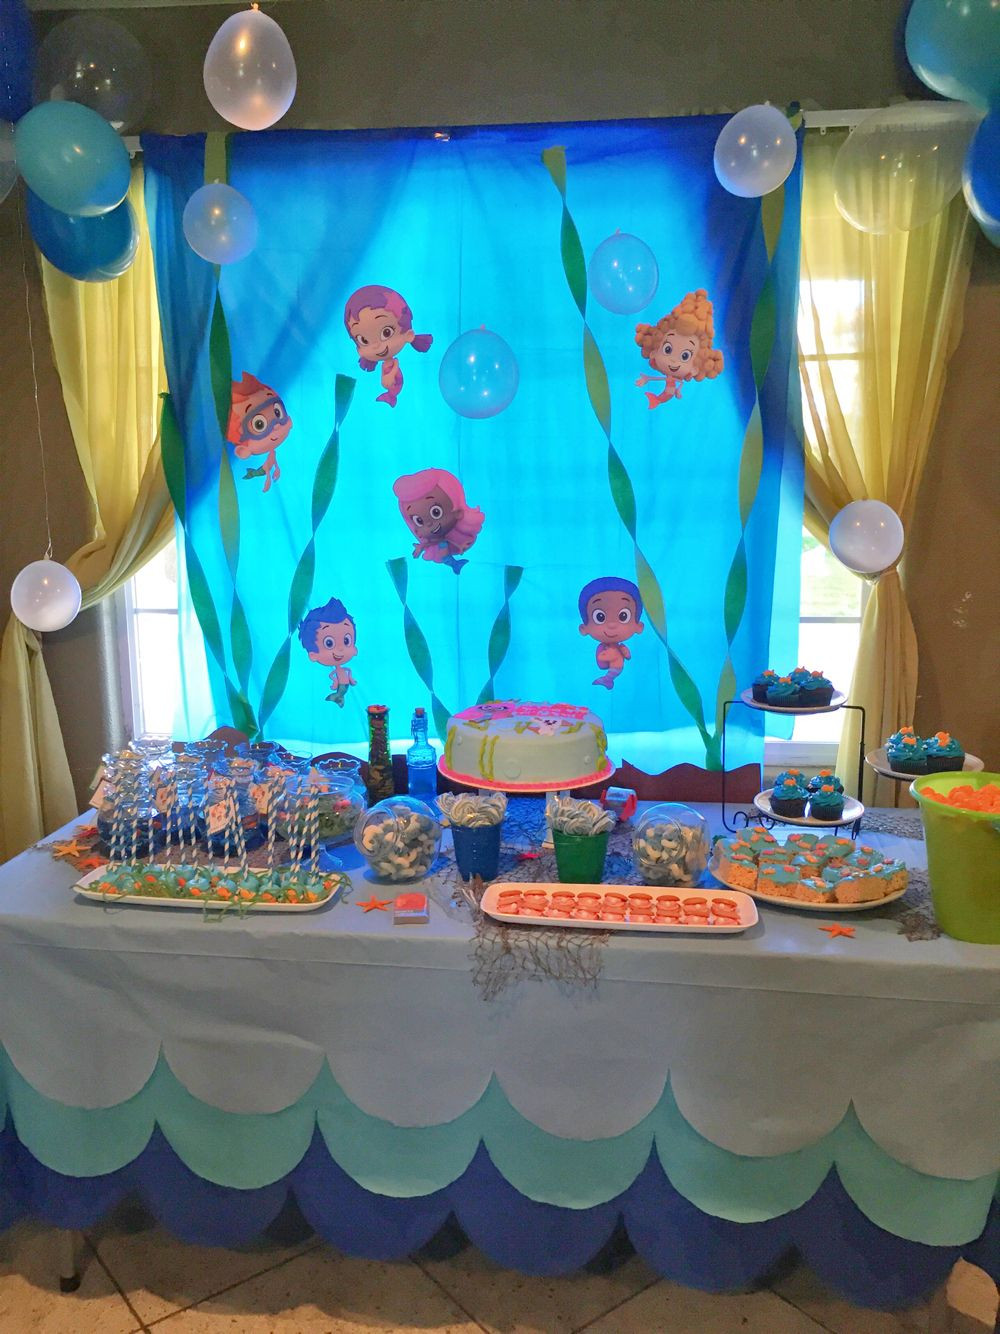 Bubble Guppies Birthday Party Supplies
 Bubble Guppies Birthday Party decorations